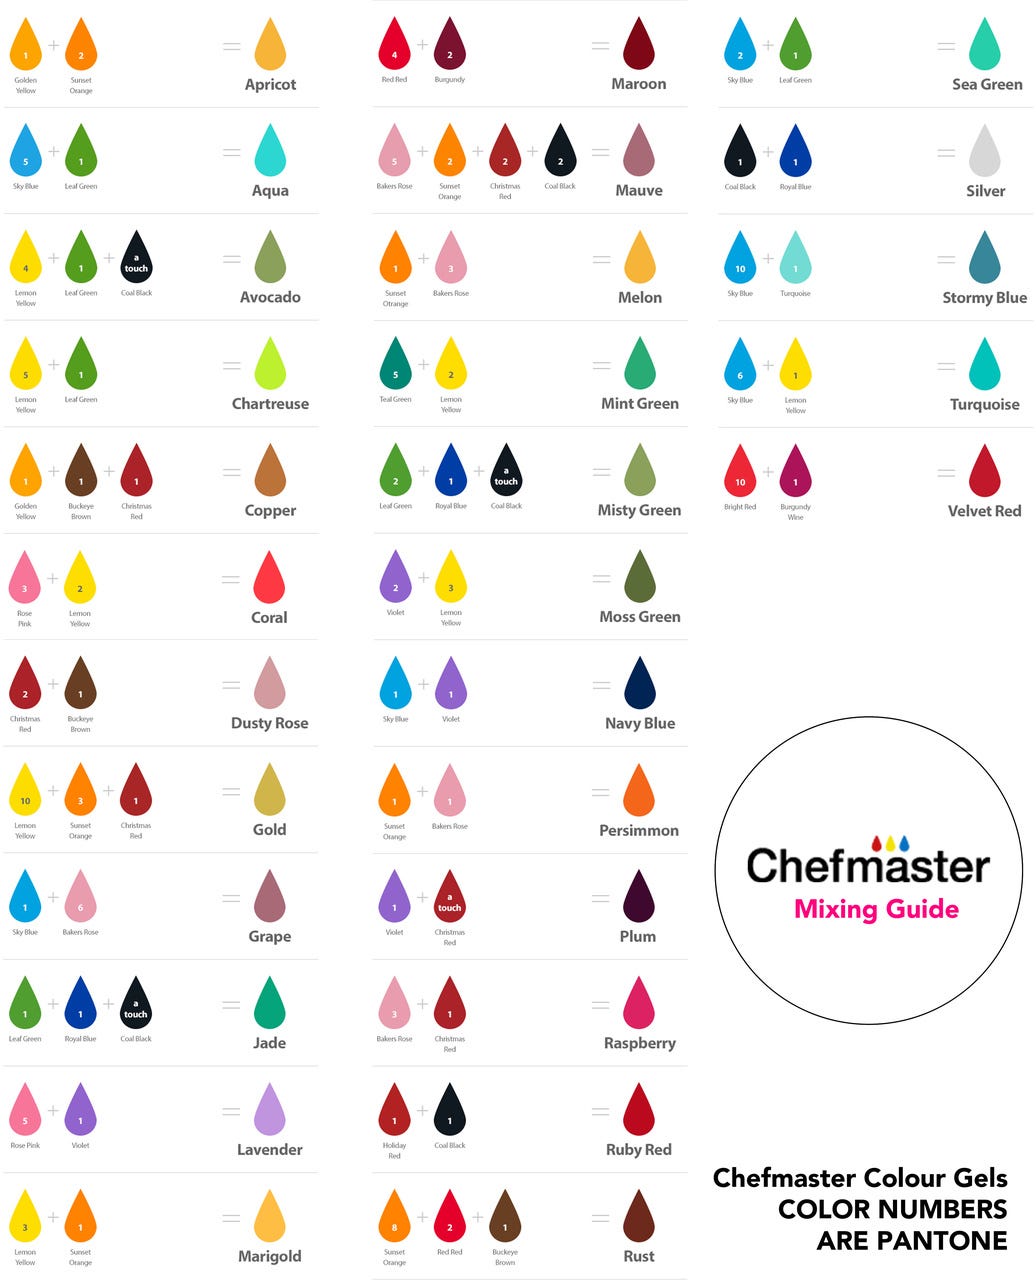 Working on a master color list for all dye brands, this is from